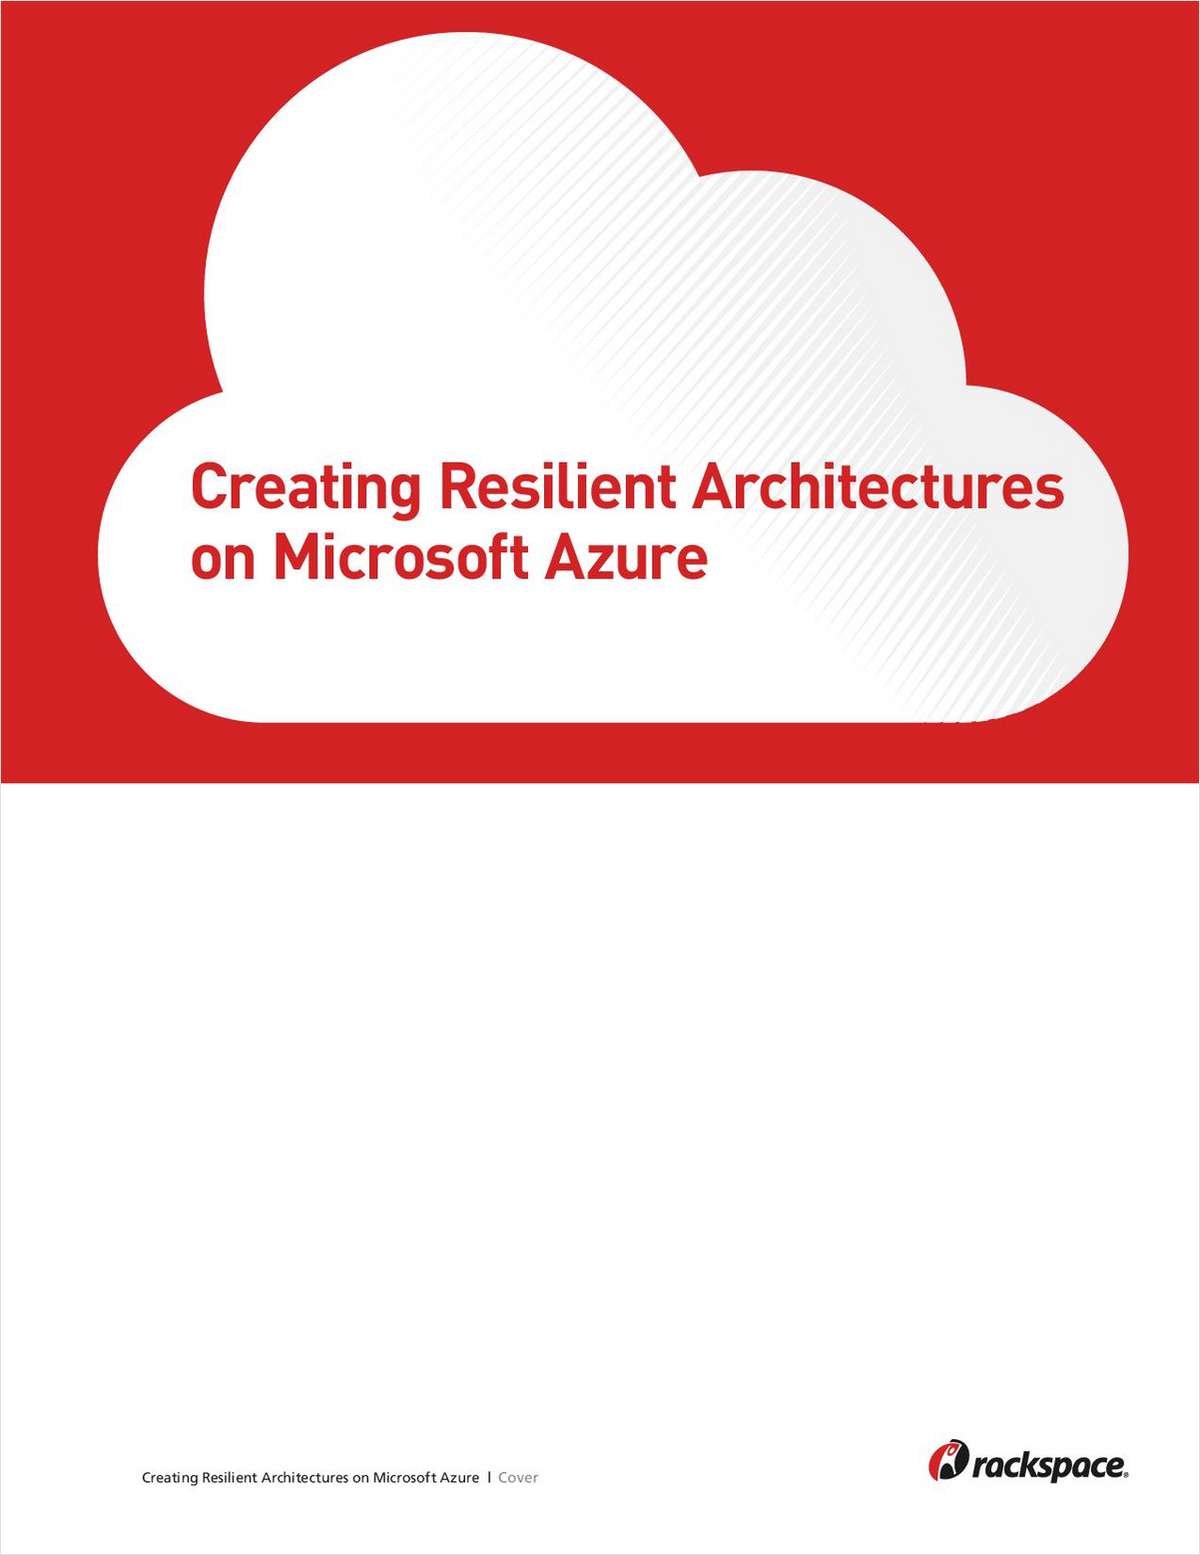 Creating Resilient Architectures on Microsoft Azure